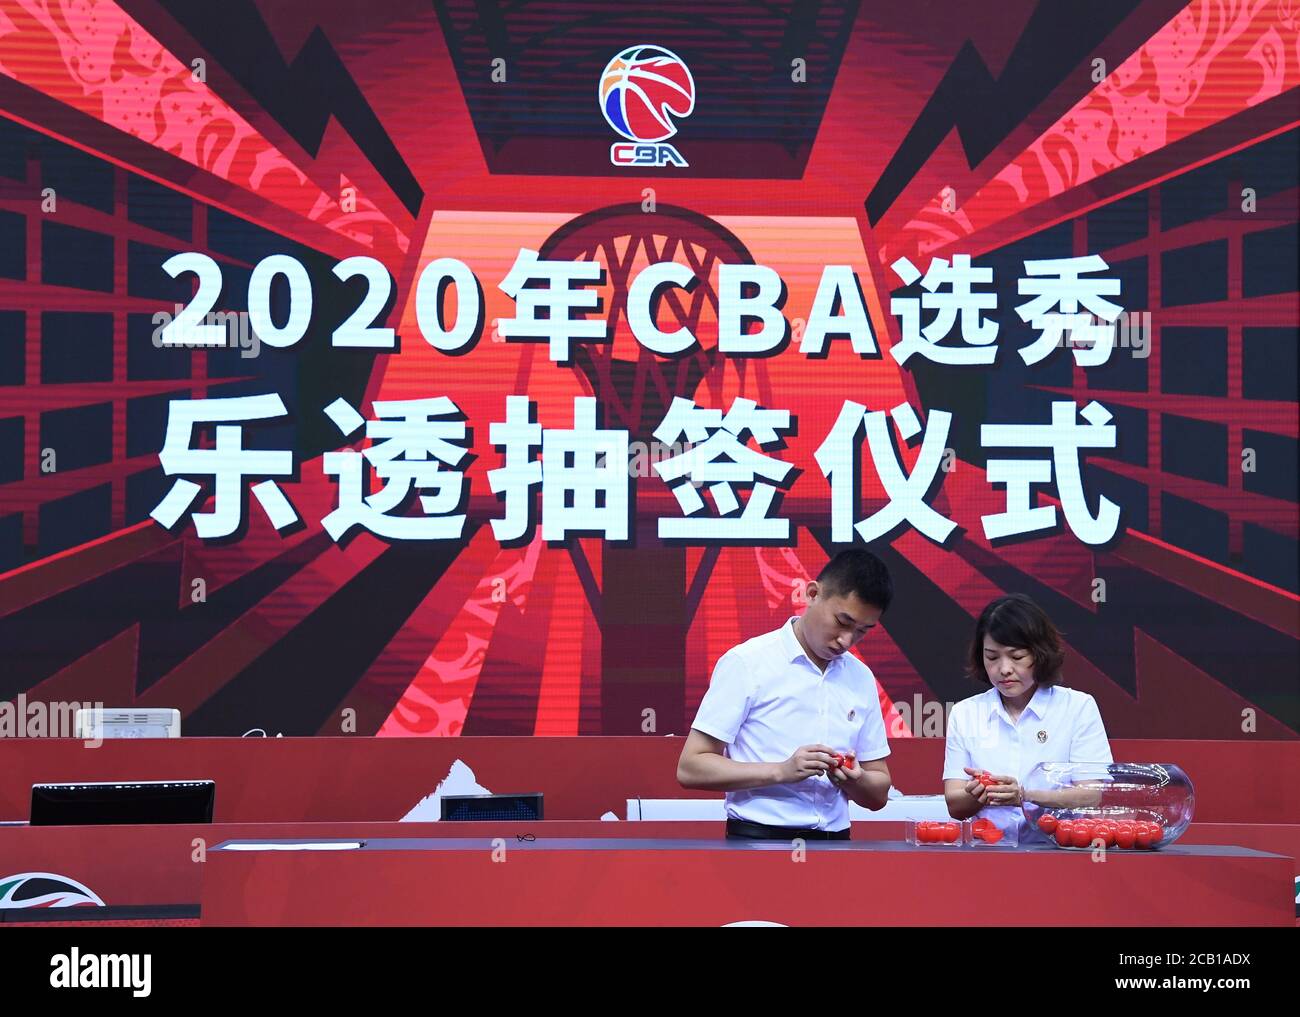 Qingdao. 10th Aug, 2020. Notaries examine the slips prior to the 2020 CBA draft lottery ceremony in Qingdao of east China's Shandong Province on Aug. 10, 2020. Shanghai Sharks won the first pick, Guangzhou Loong Lions and Tianjin Pioneers got the second and third pick respectively. Credit: Zhu Zheng/Xinhua/Alamy Live News Stock Photo